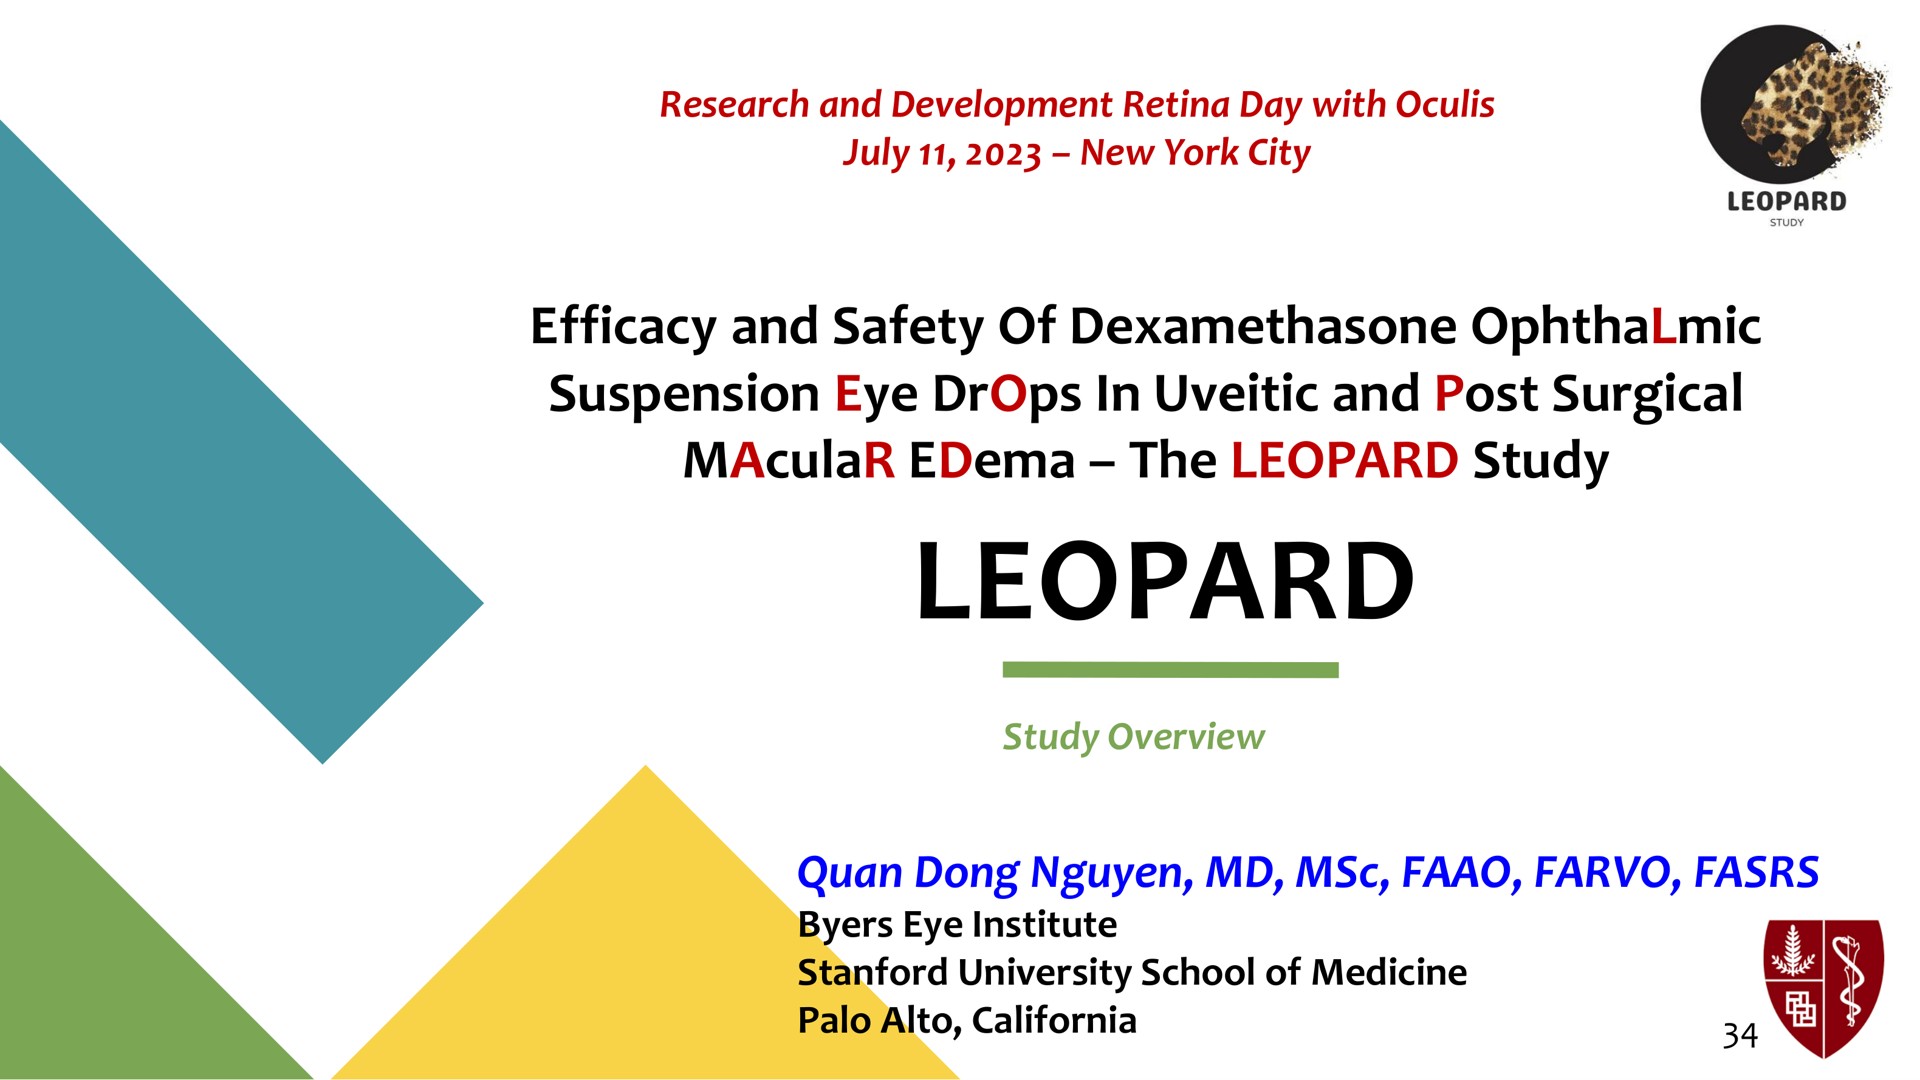 efficacy and safety of ophthalmic suspension eye drops in uveitic and post surgical macular edema the leopard study leopard | Oculis